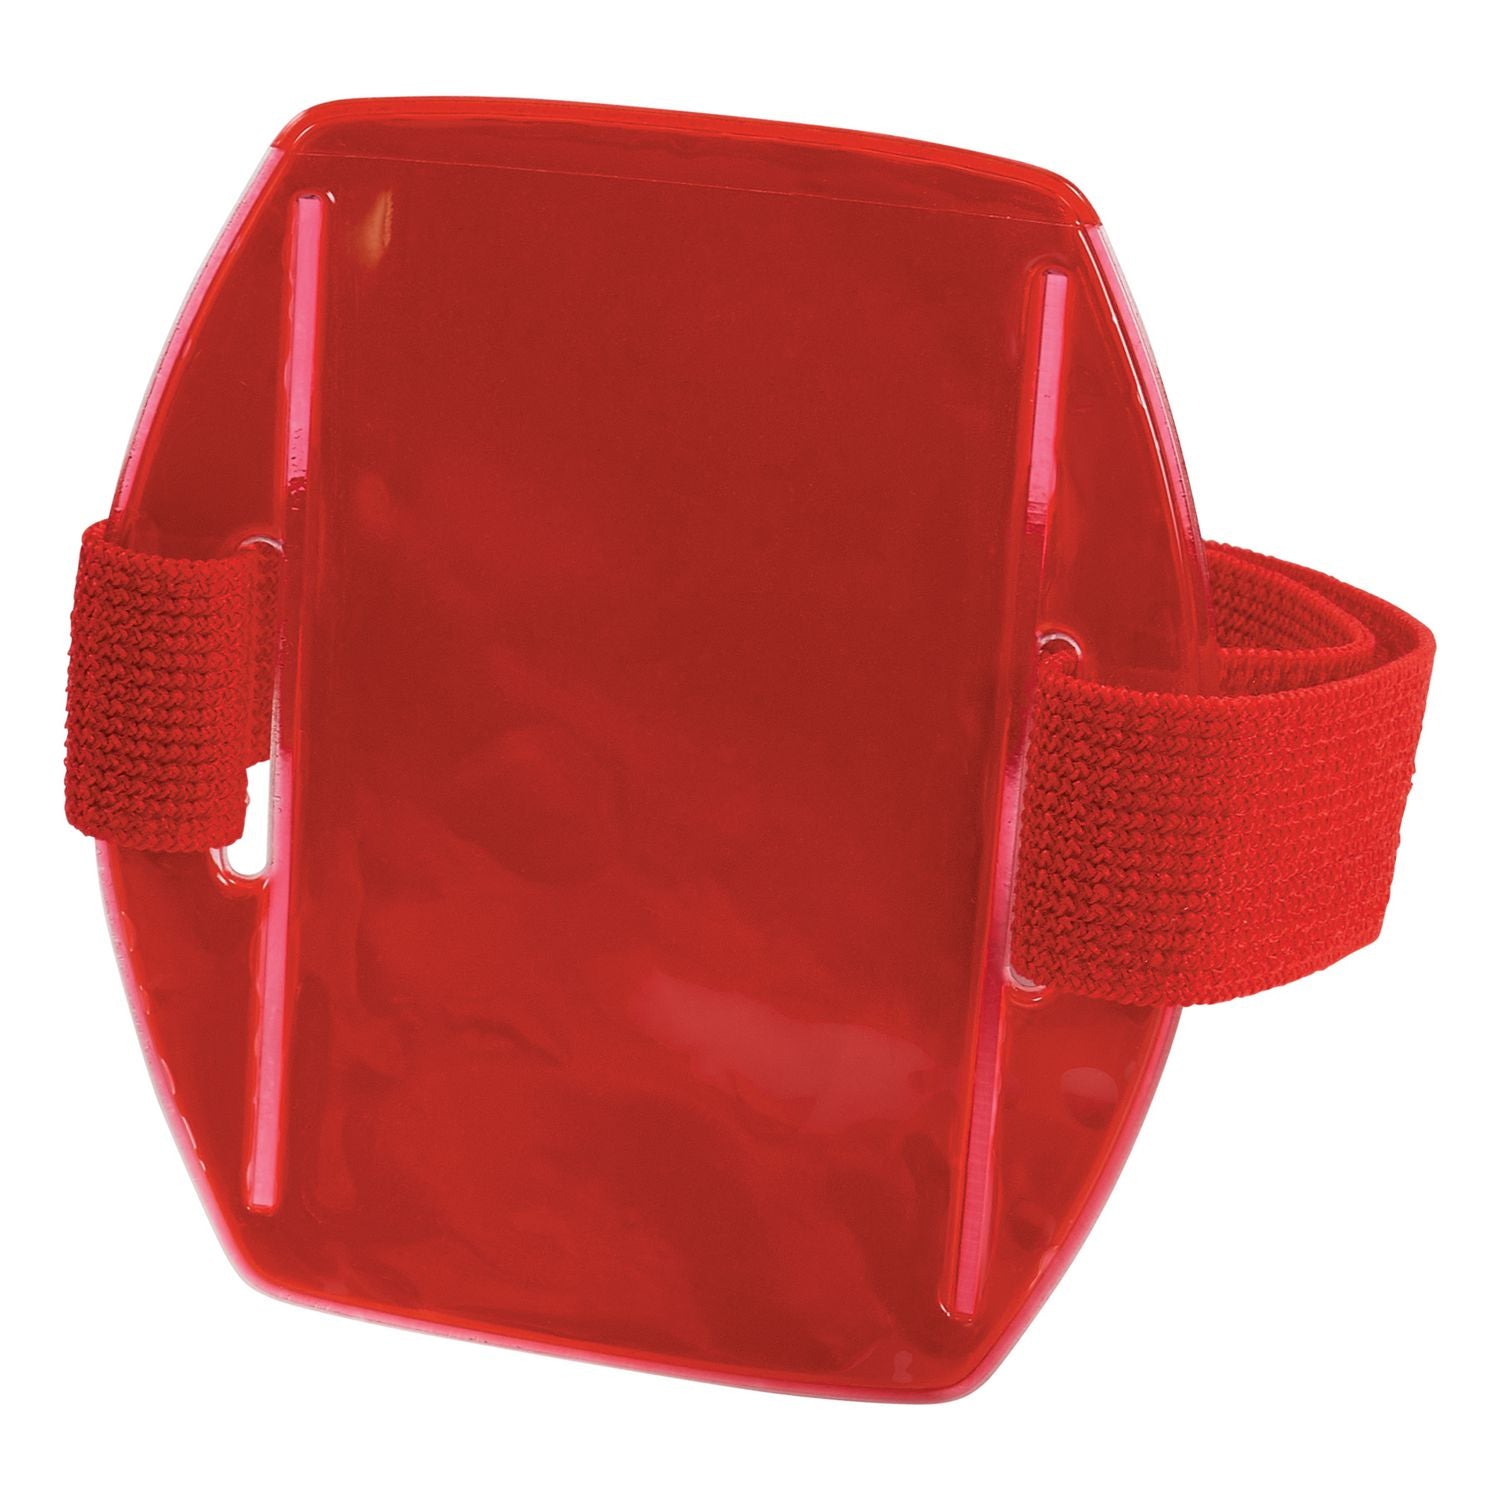 squids-3386-arm-band-id-badge-holder-vertical-red-375-x-425-holder-25-x-4-insert-10-pack-ships-in-1-3-business-days_ego19969 - 1